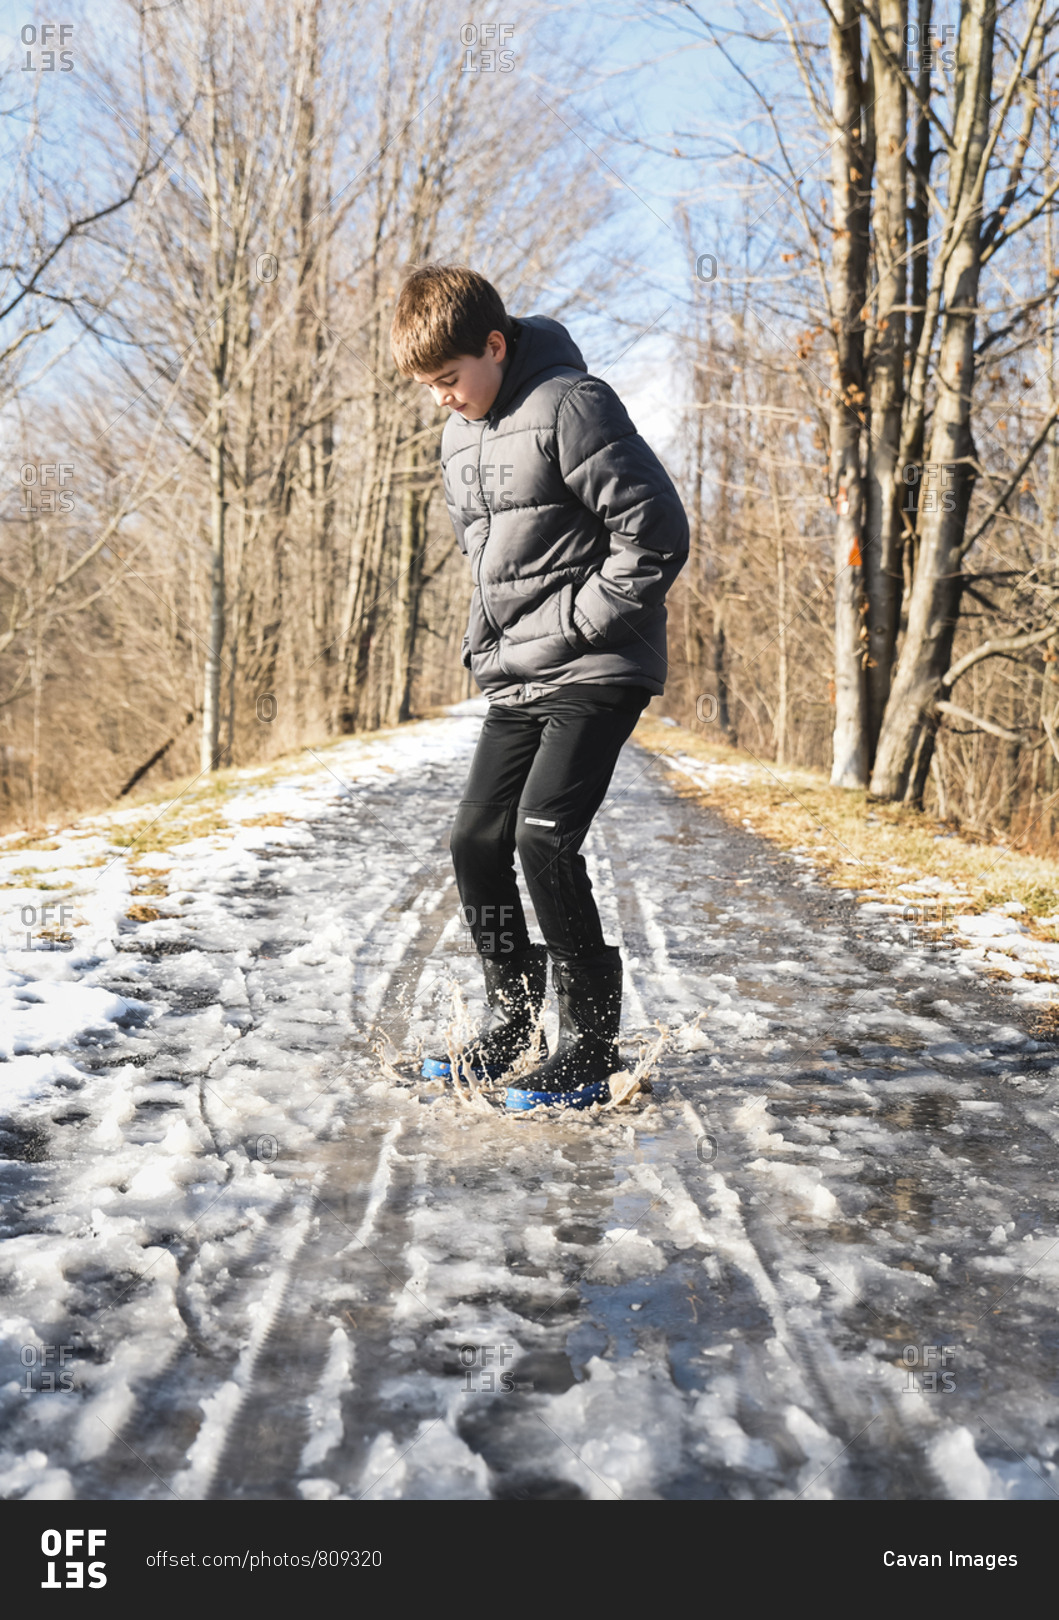 Preteen boy jumping in a slushy puddle on a hiking trail in winter.